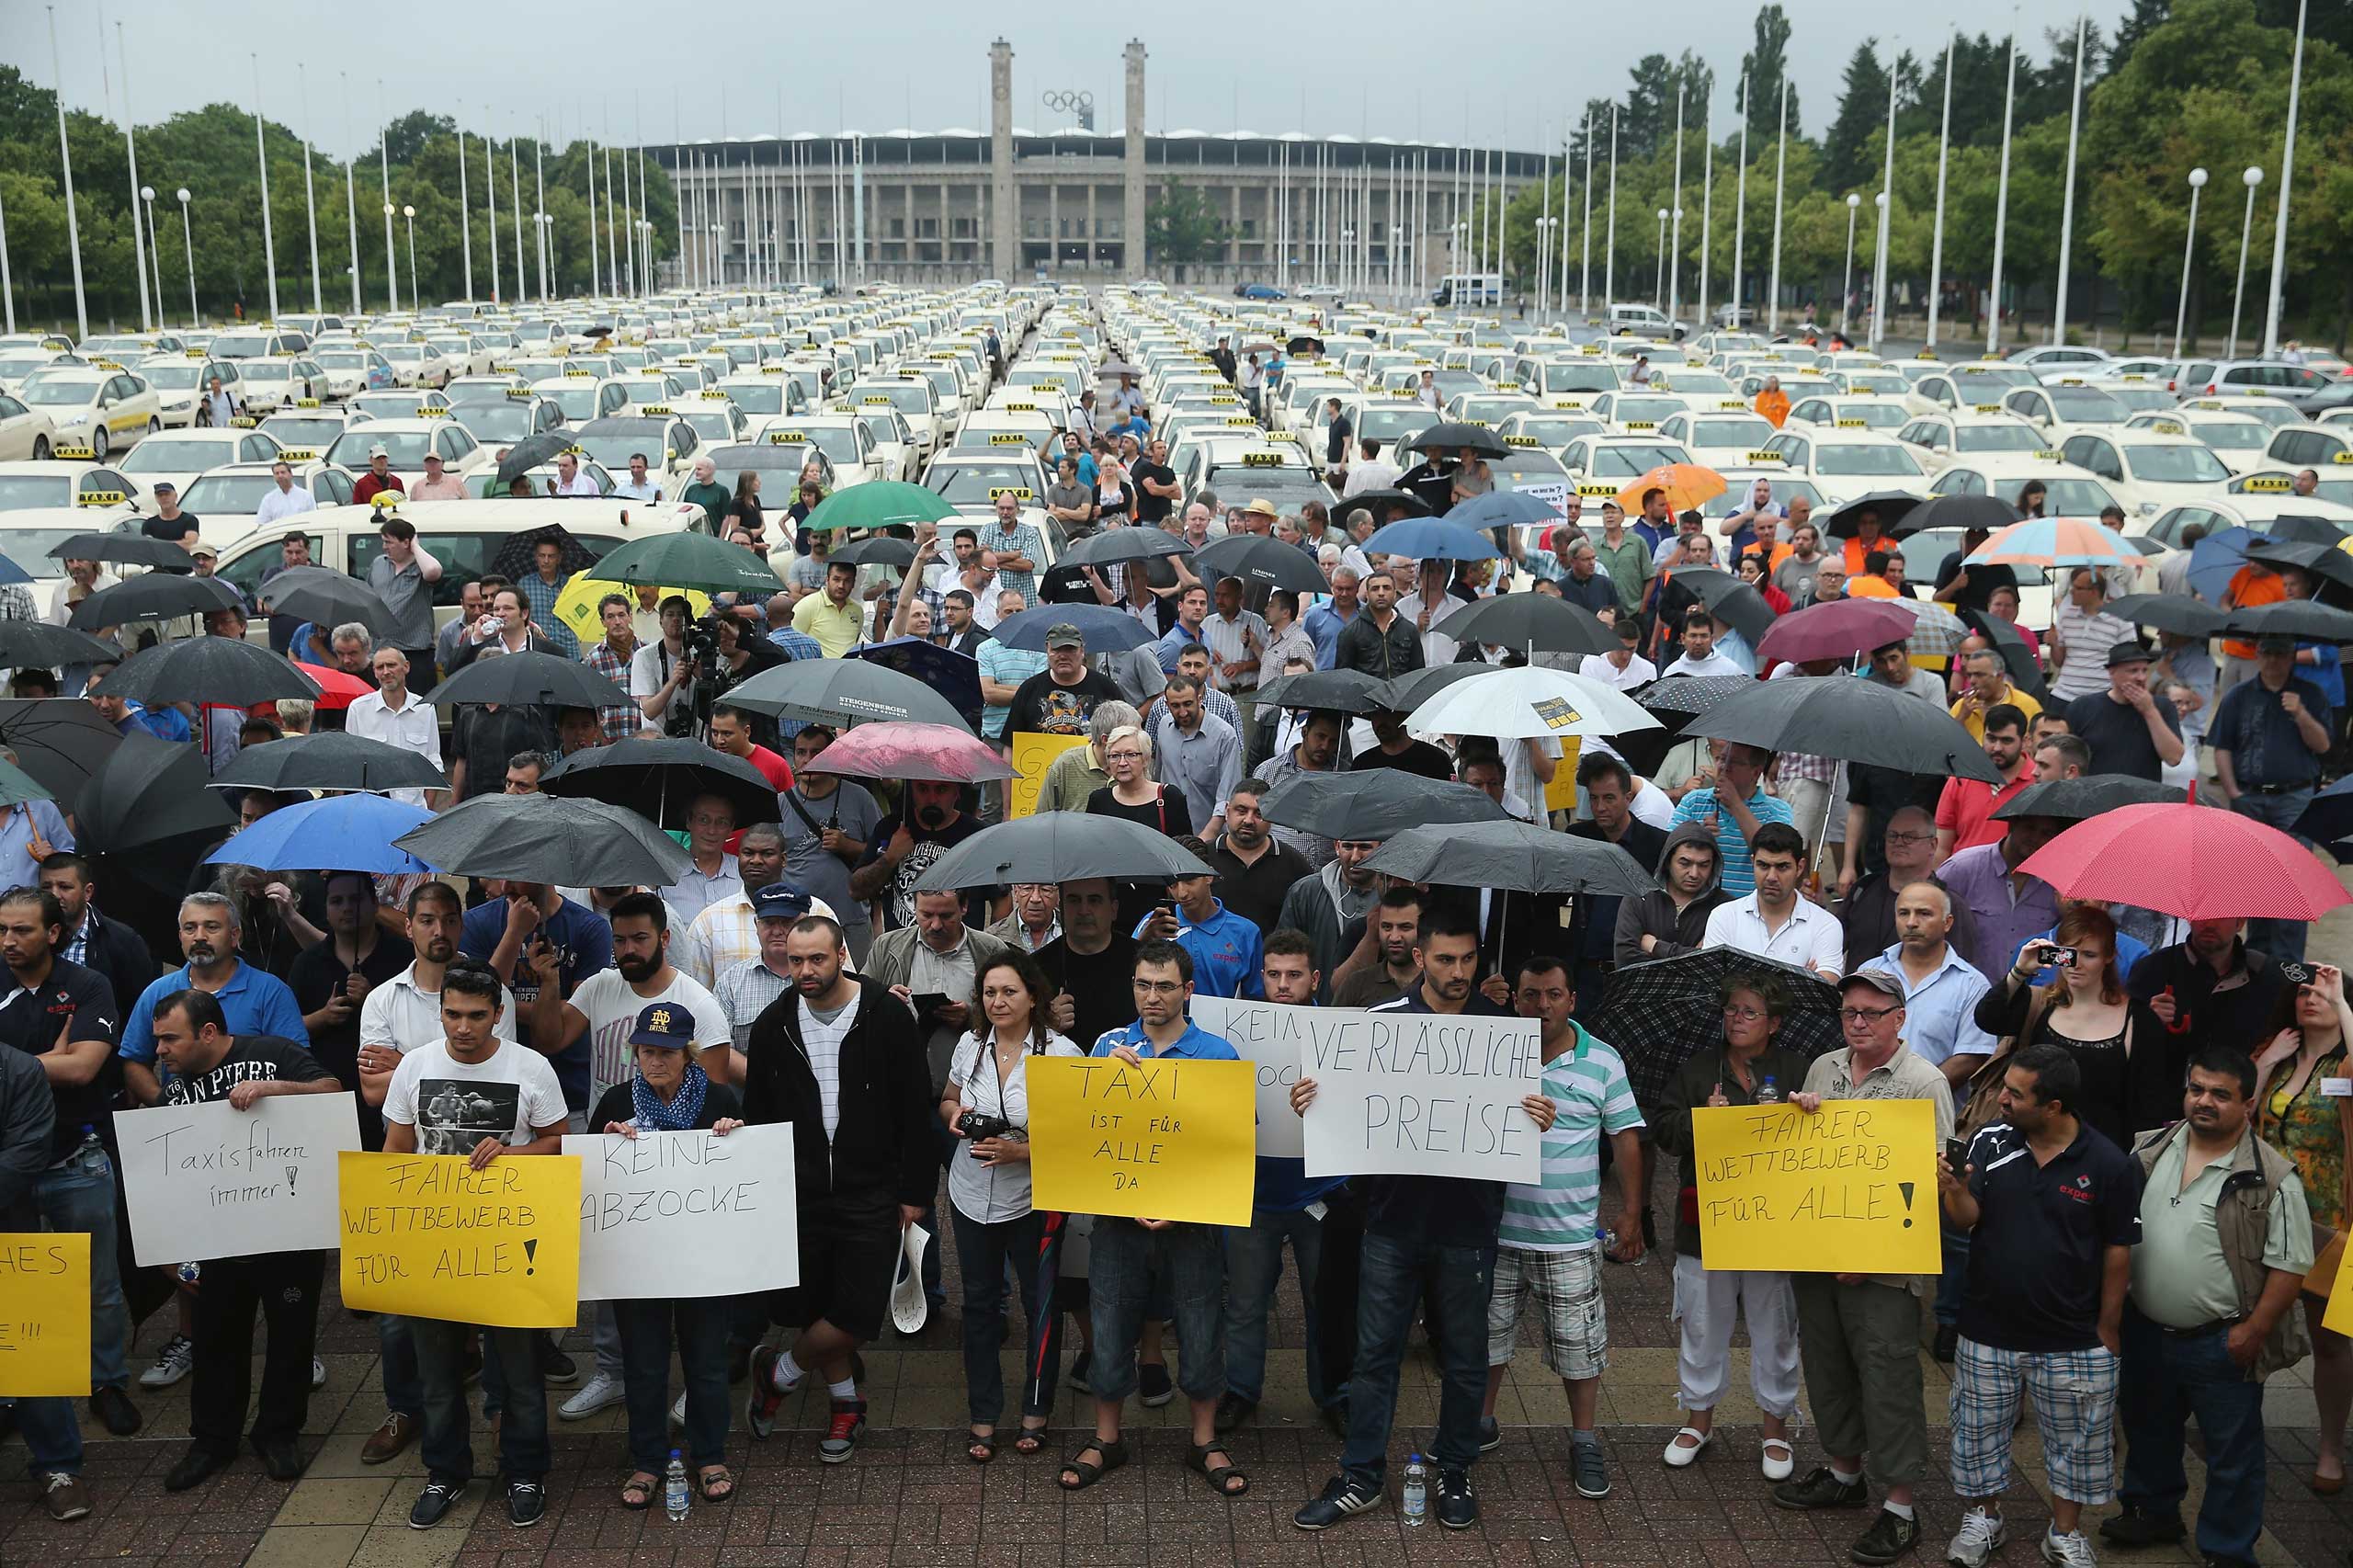 Hundreds of taxi drivers gather next to the Olympia Stadium to protest ride-sharing apps on June 11, 2014 in Berlin.